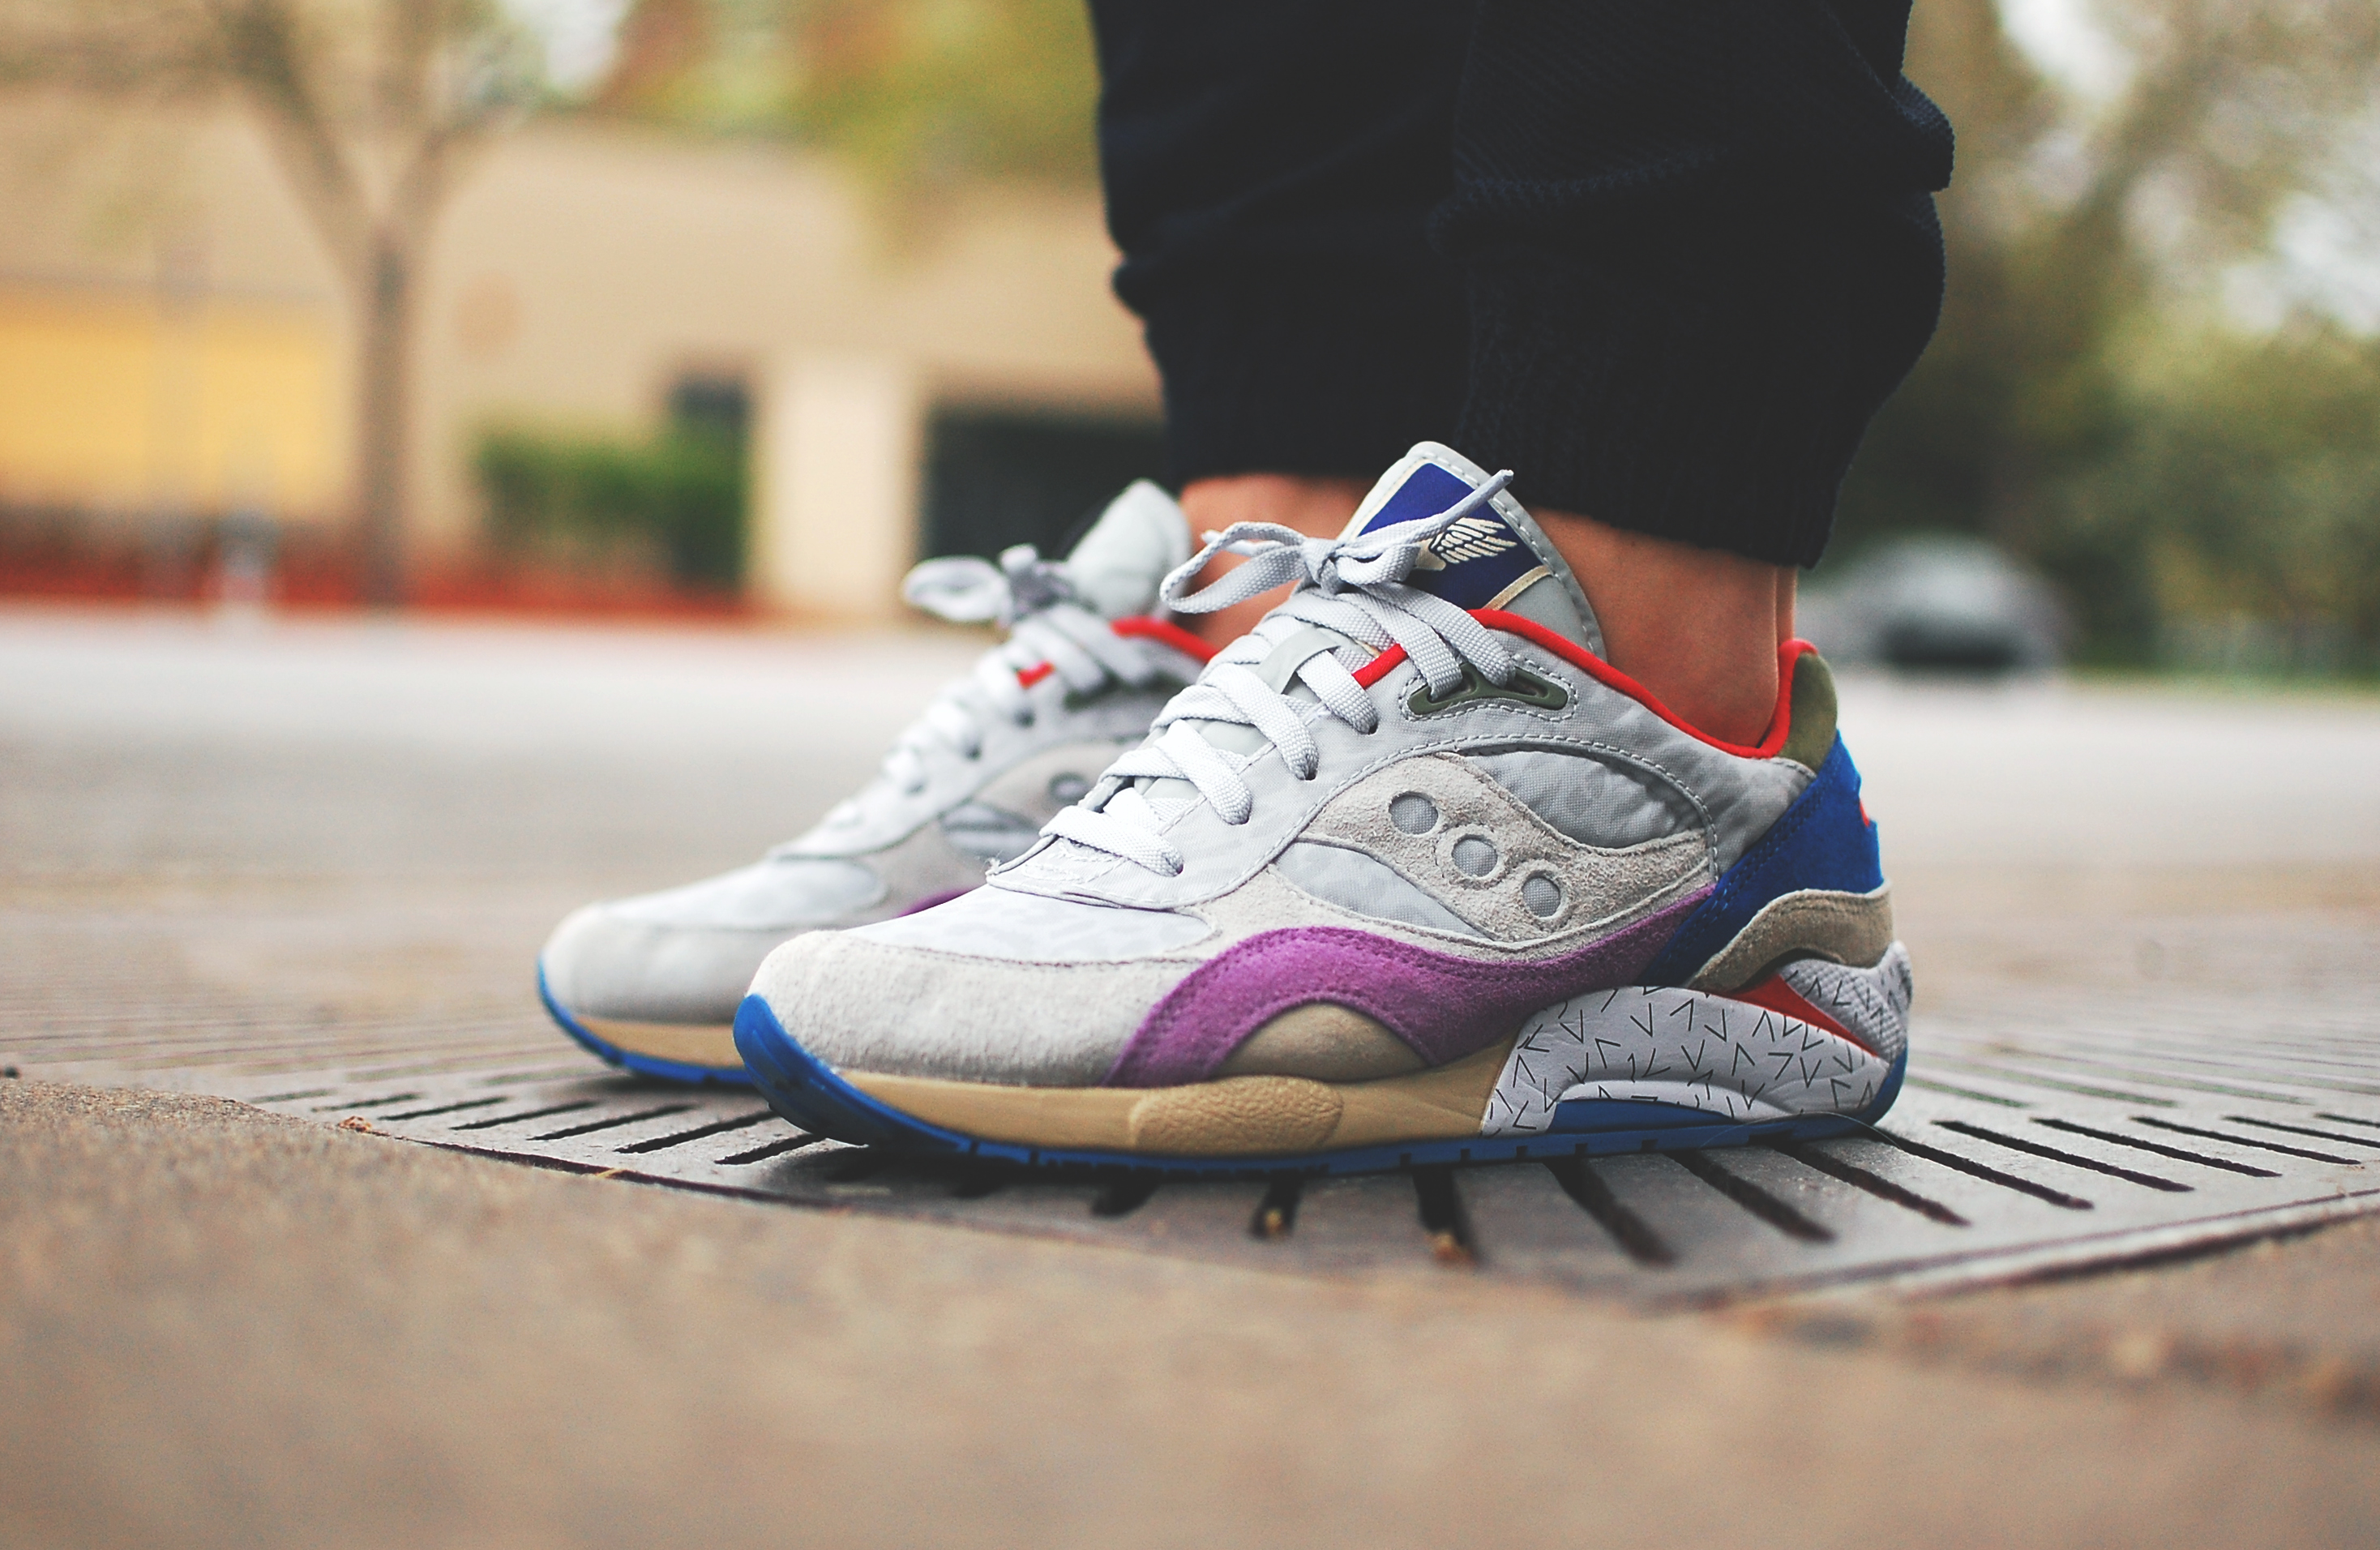 Saucony G9 Shadow 6 Pattern Recognition 